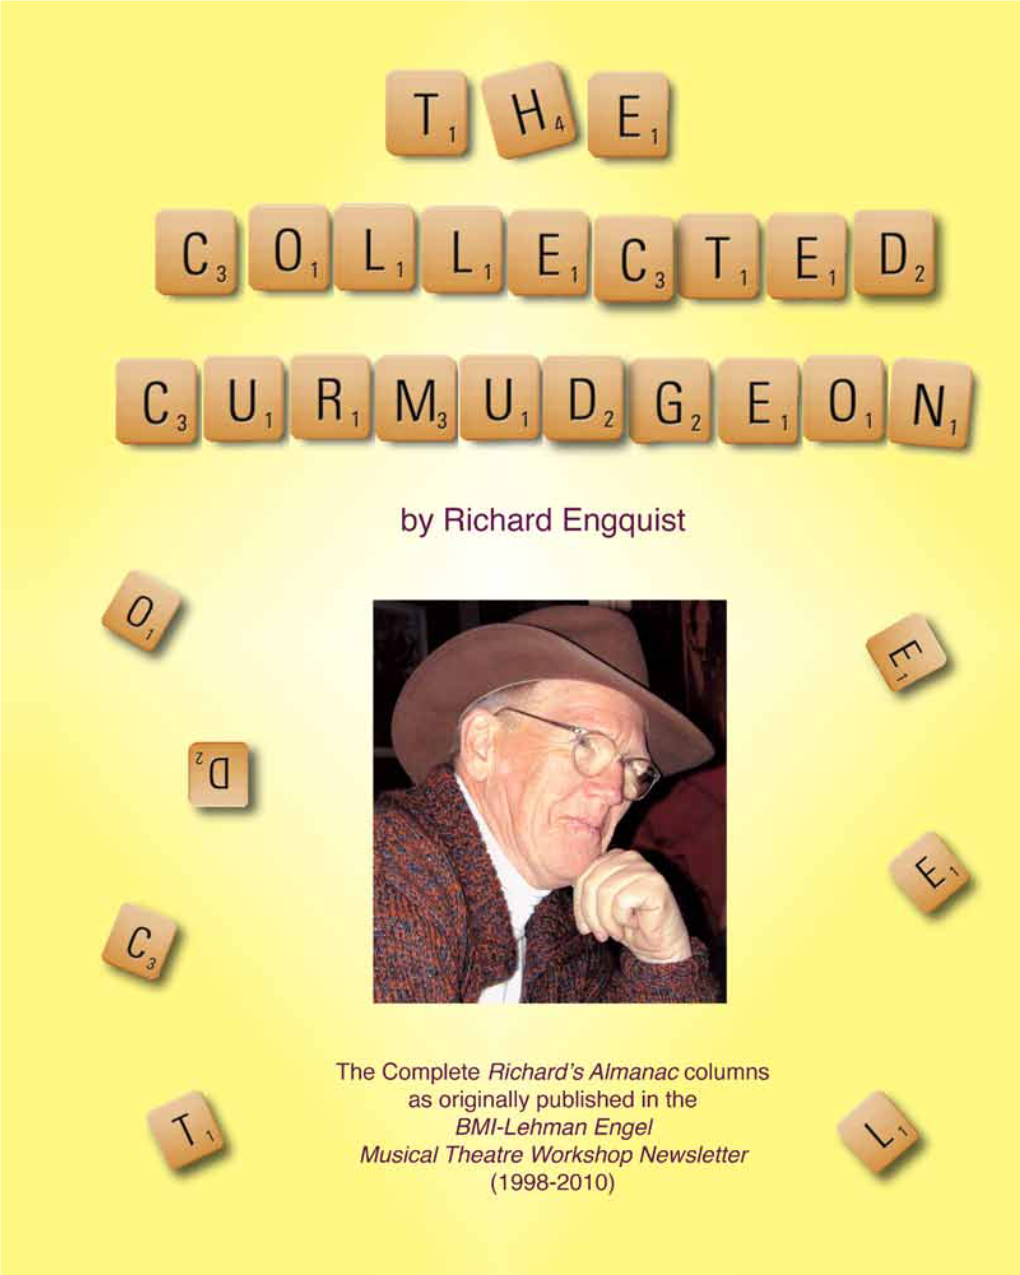 A Standard-View PDF Copy of the COLLECTED CURMUDGEON As Published and Distributed